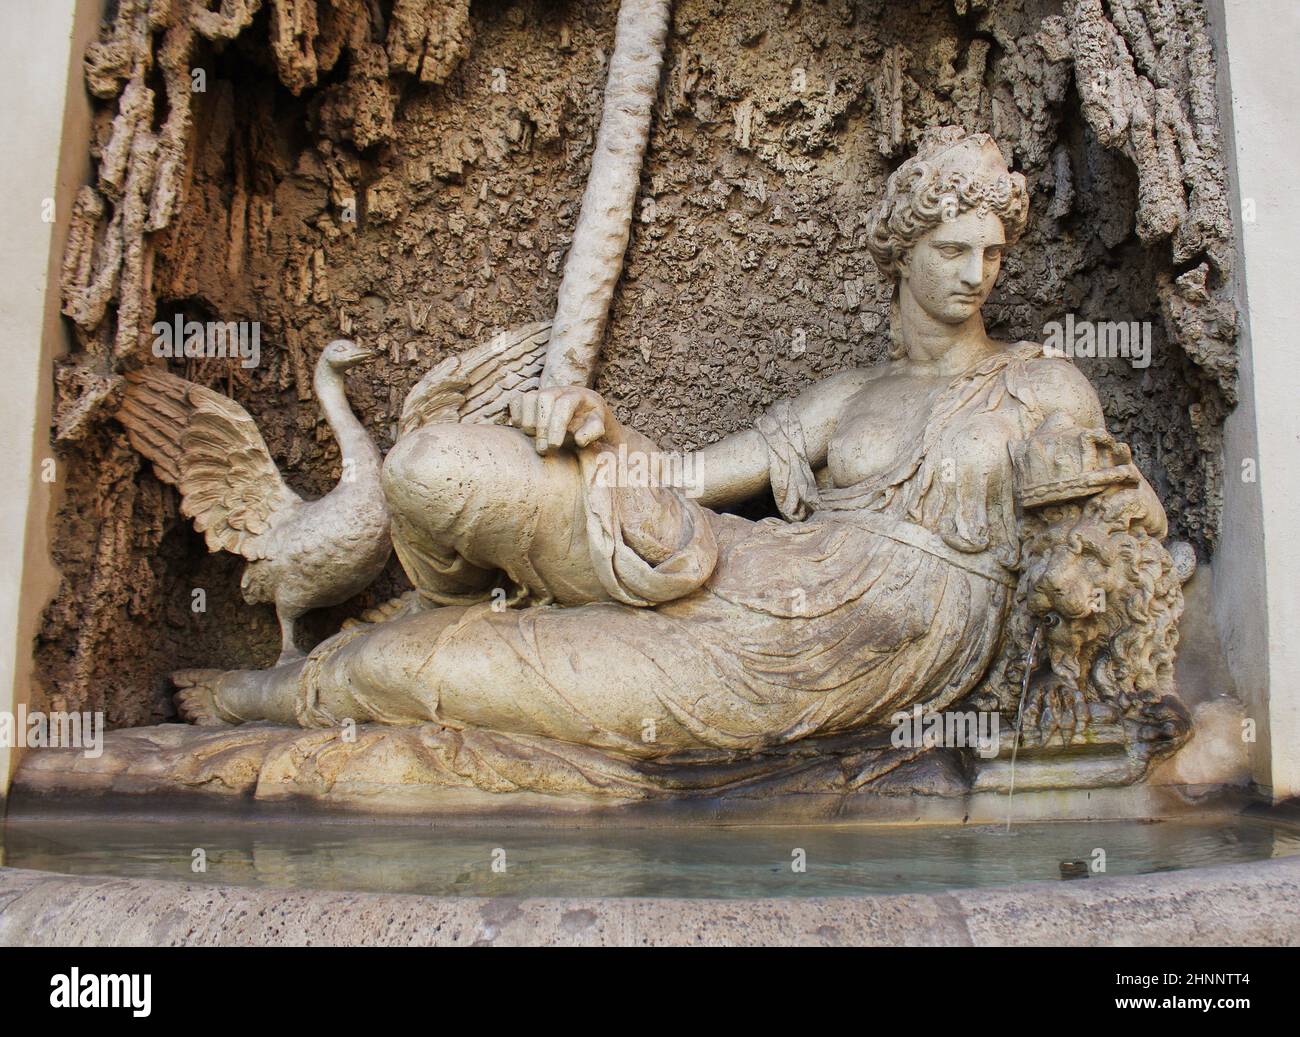 Rome, Italy - December 28, 2018: Goddess Juno sculpture at Crossing of Quattro Fontane, Renaissance fountain statue representing Juno goddess of marriage, pregnancy and childbirth, protector of the State, symbol of loyalty. Stock Photo